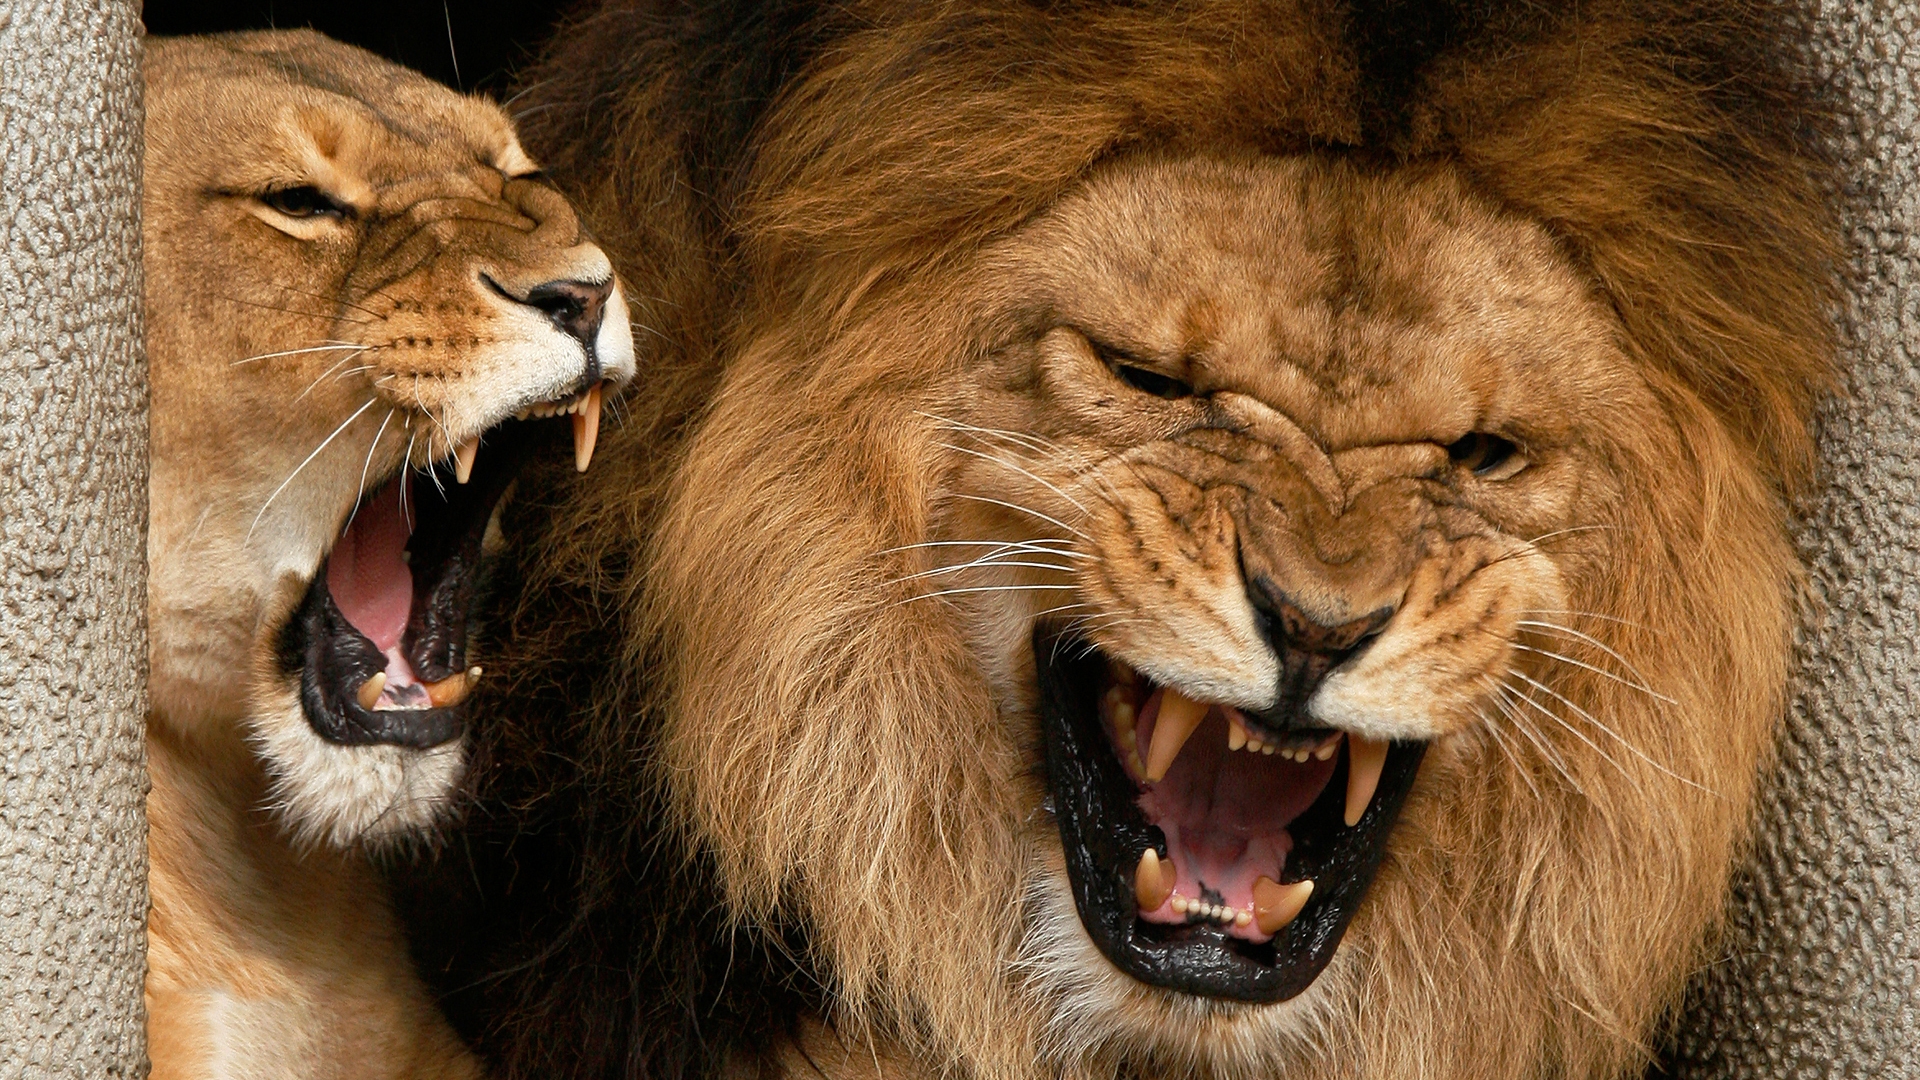 Angry Lions for 1920 x 1080 HDTV 1080p resolution